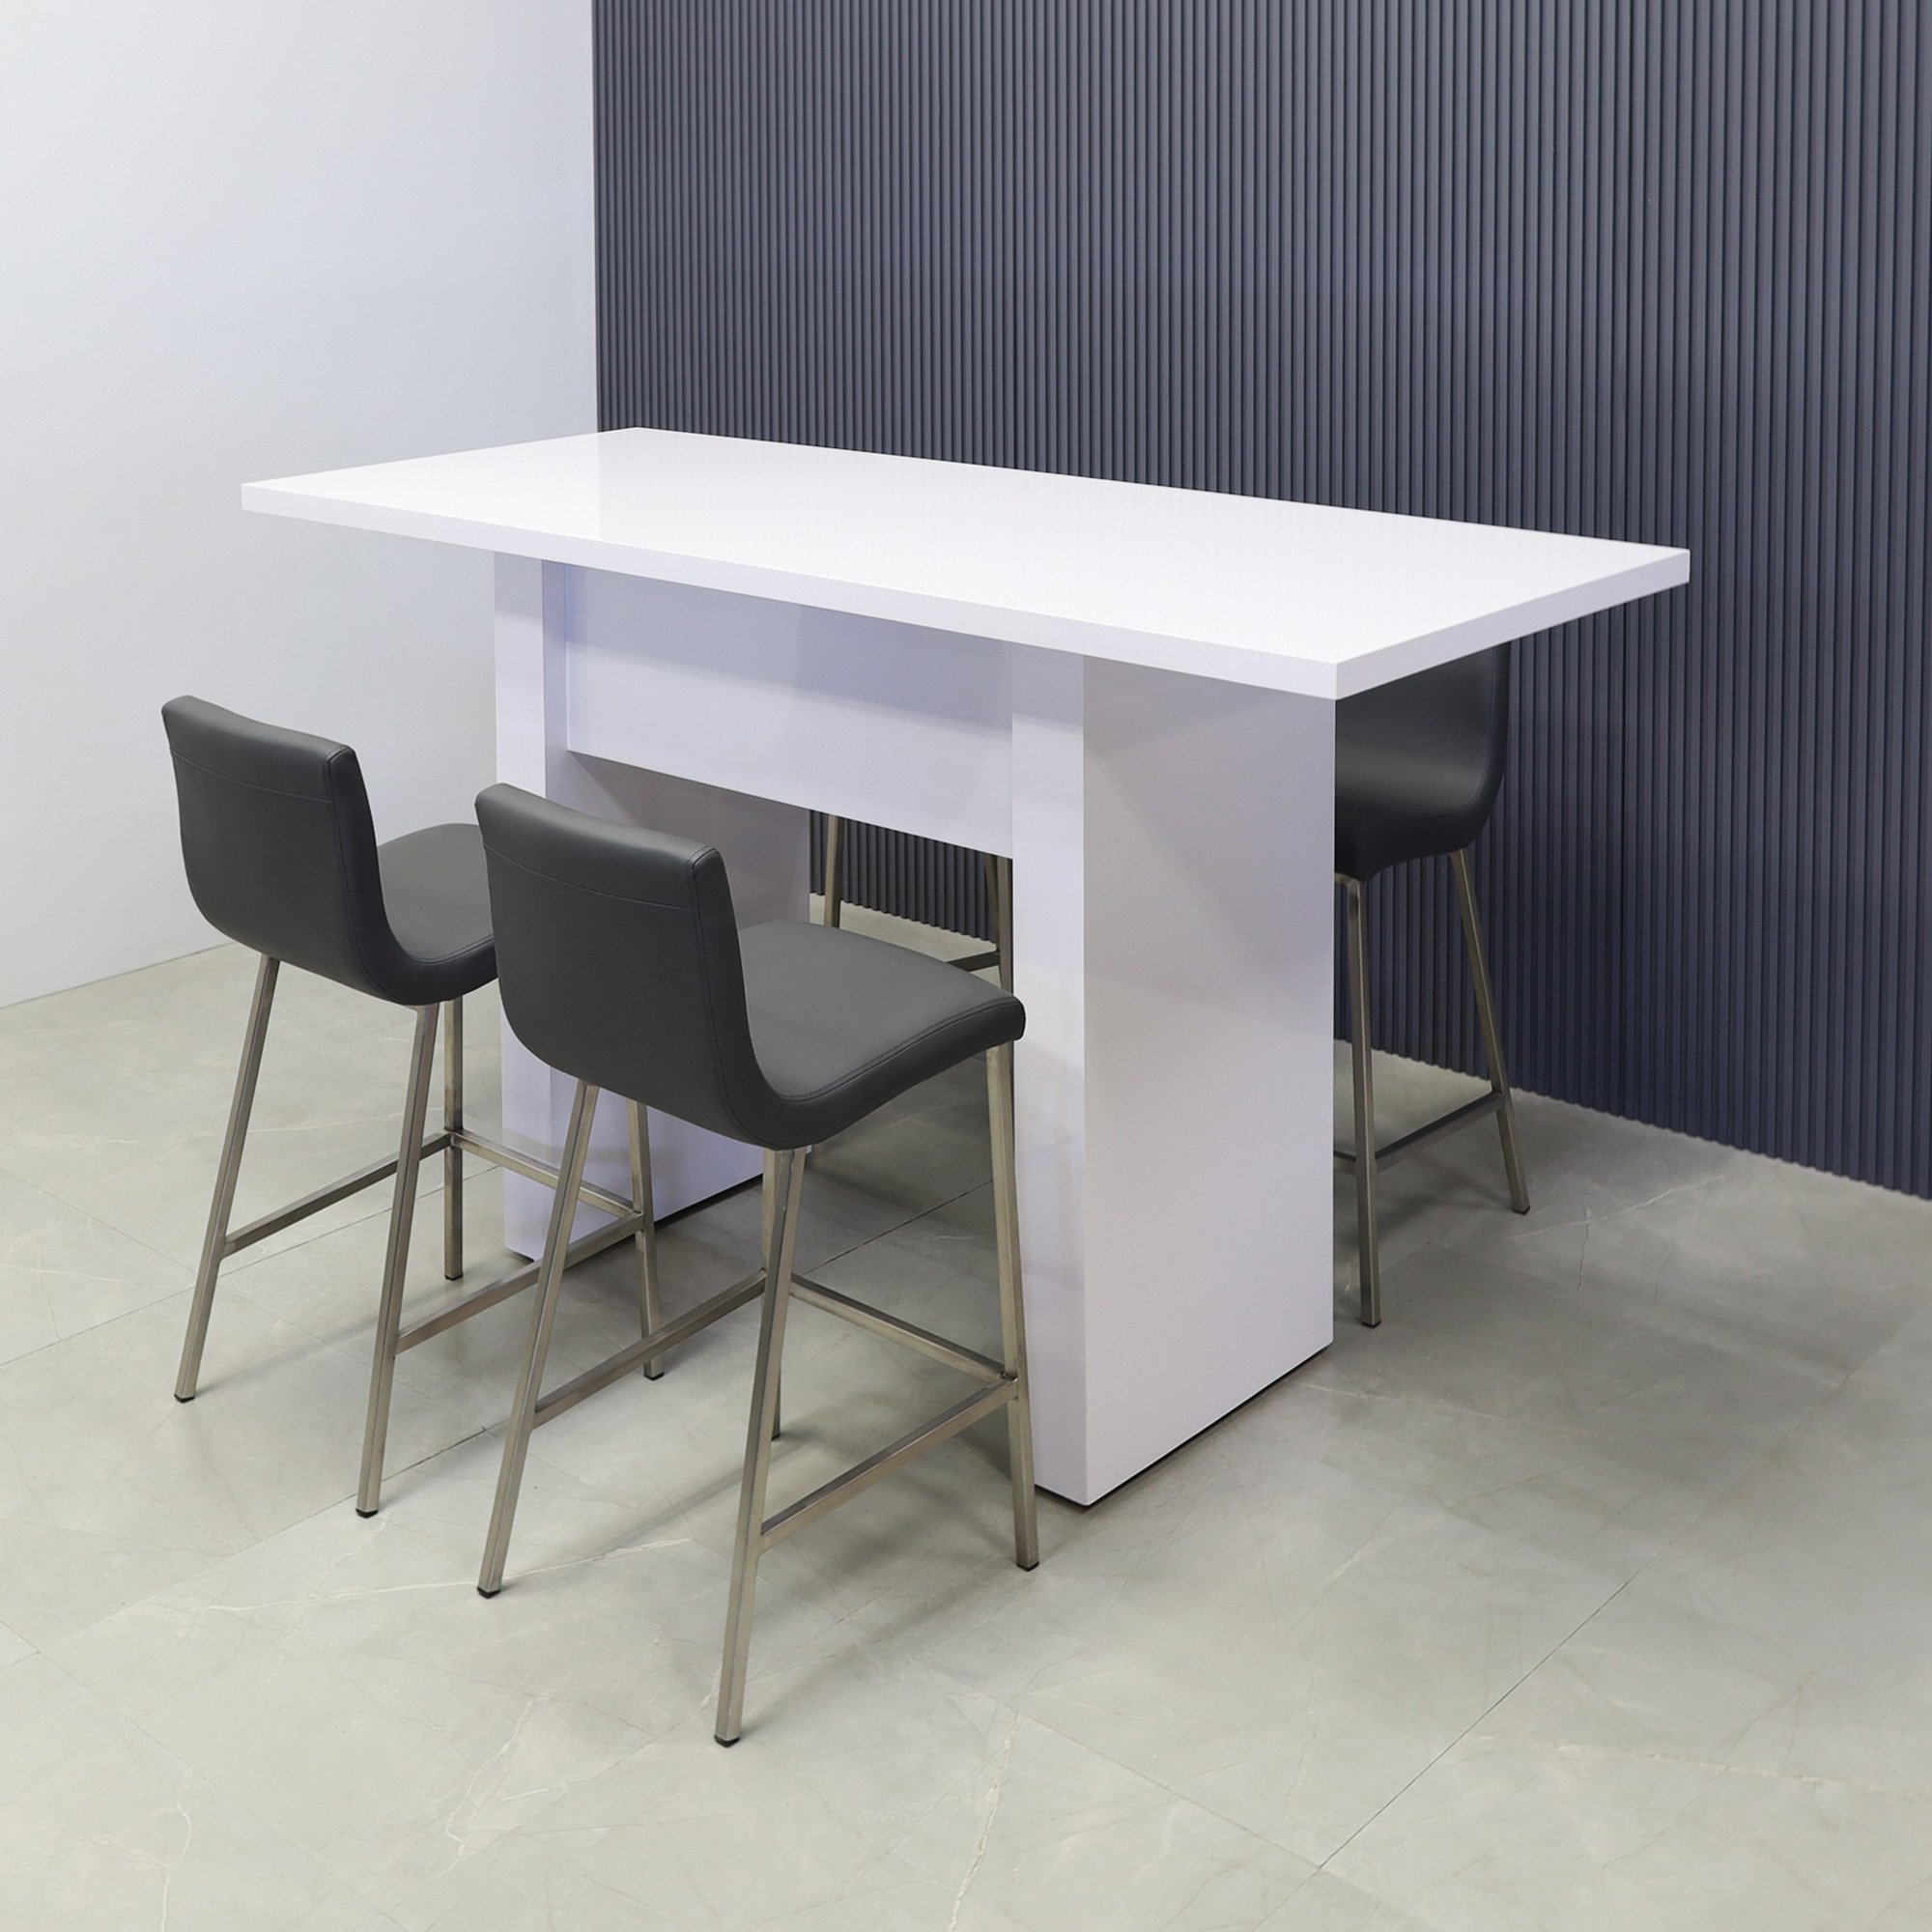 72-inch width x 42-inch height, Windsor Laminate Collaboration Table in white gloss laminate top & base, shown here.